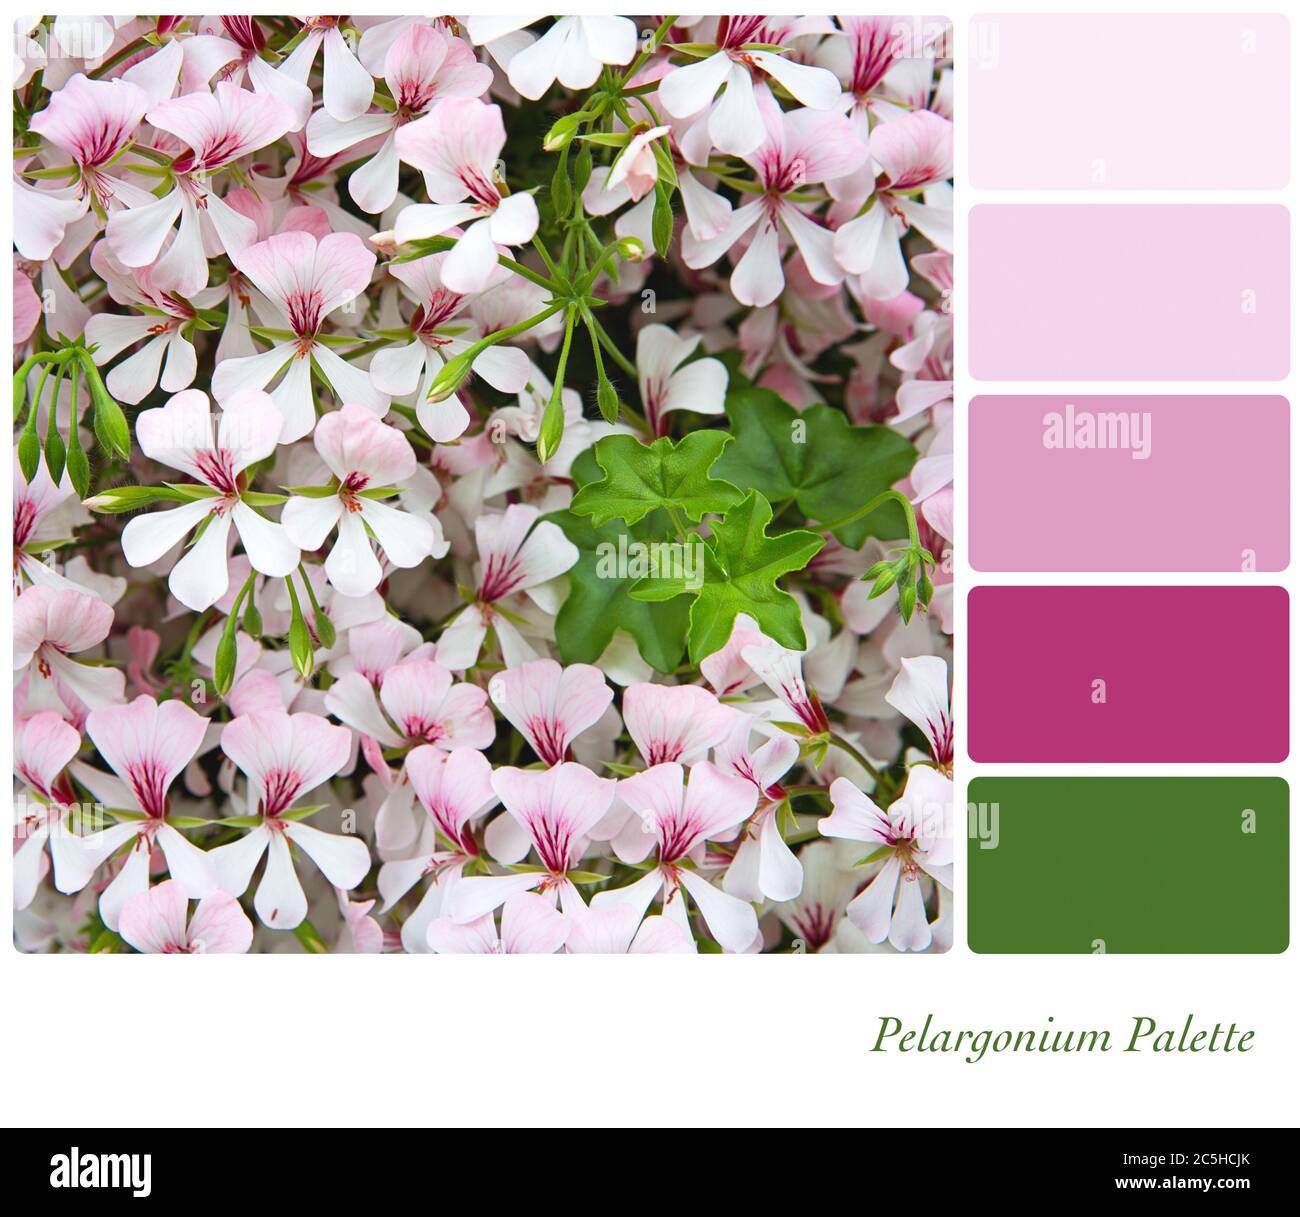 A sbackground of pink pelargoniun flowers, in a colour palette with complimentary colour swatches Stock Photo